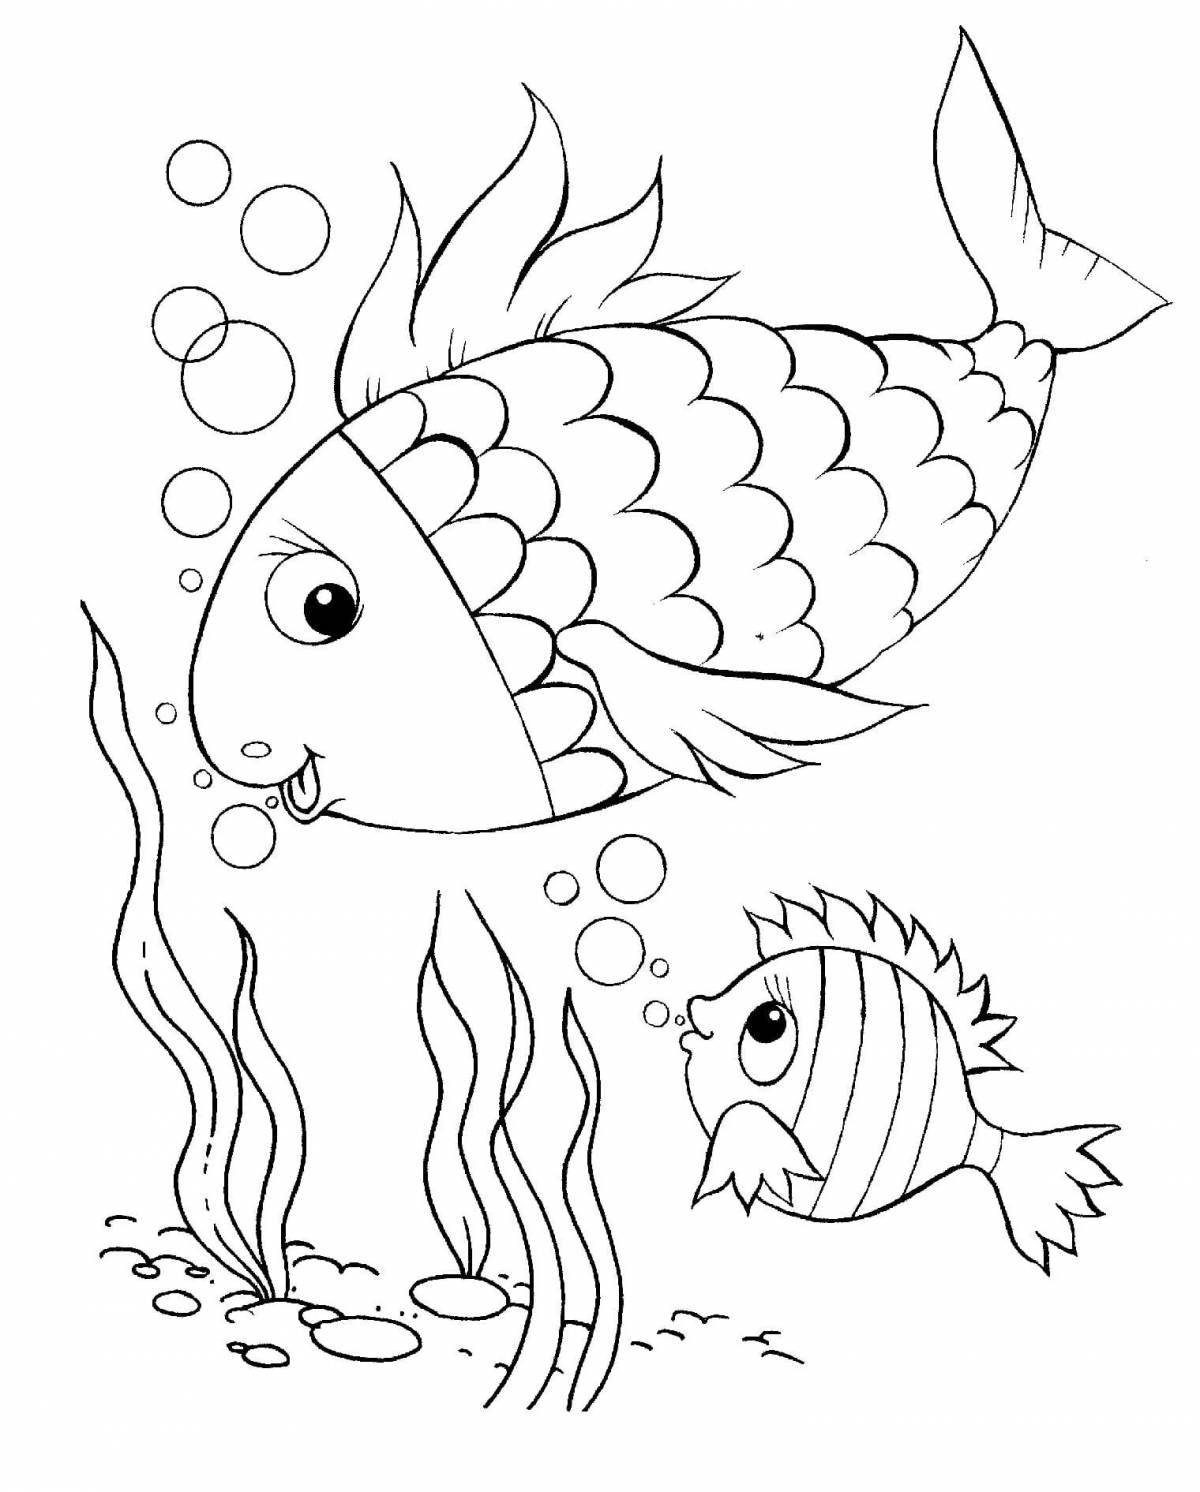 Coloring fish for children 6-7 years old